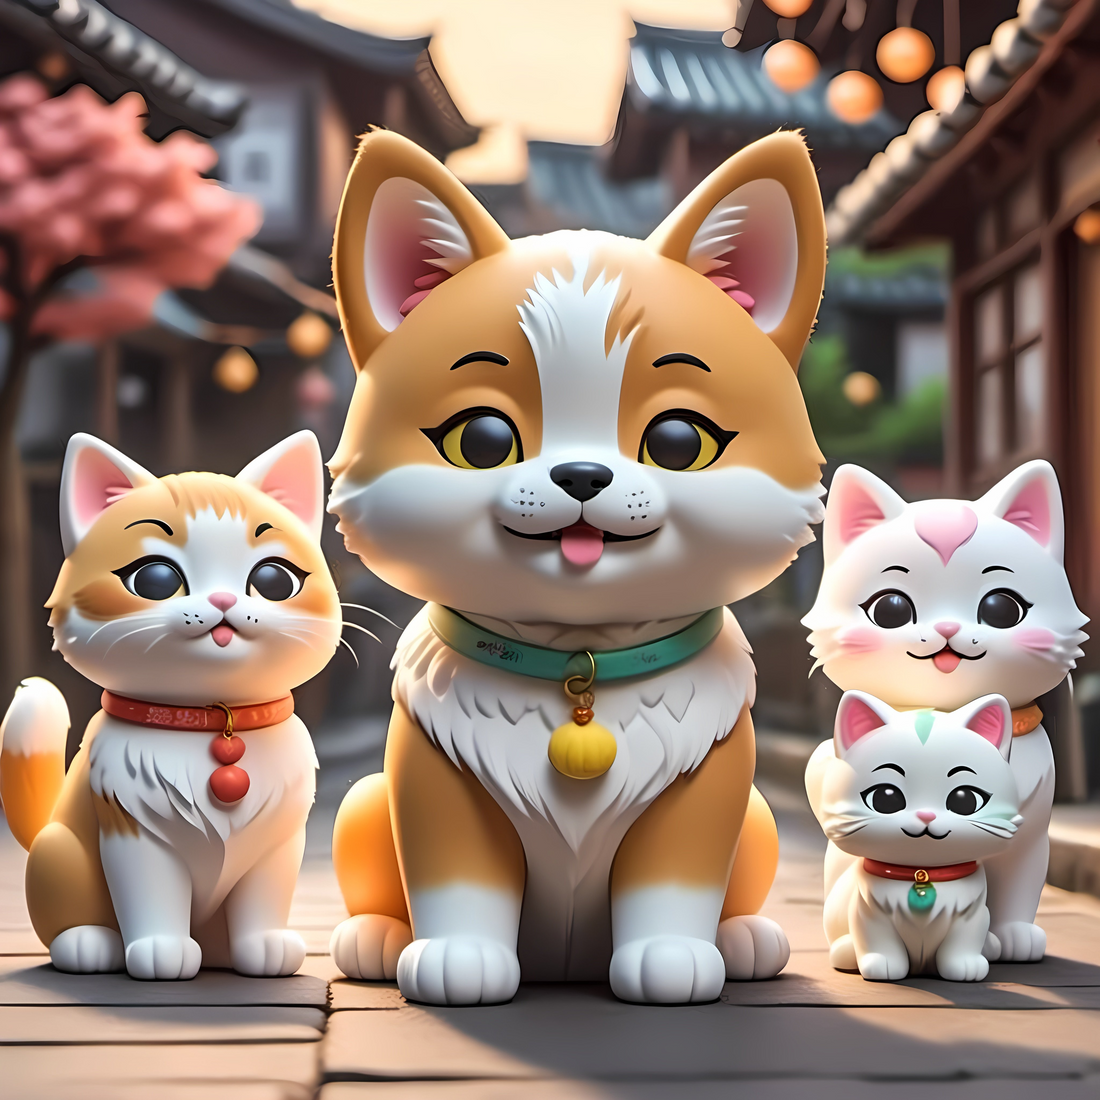 Meet NEKO INU: Revolutionizing Pet Care with Innovative Products and Passion